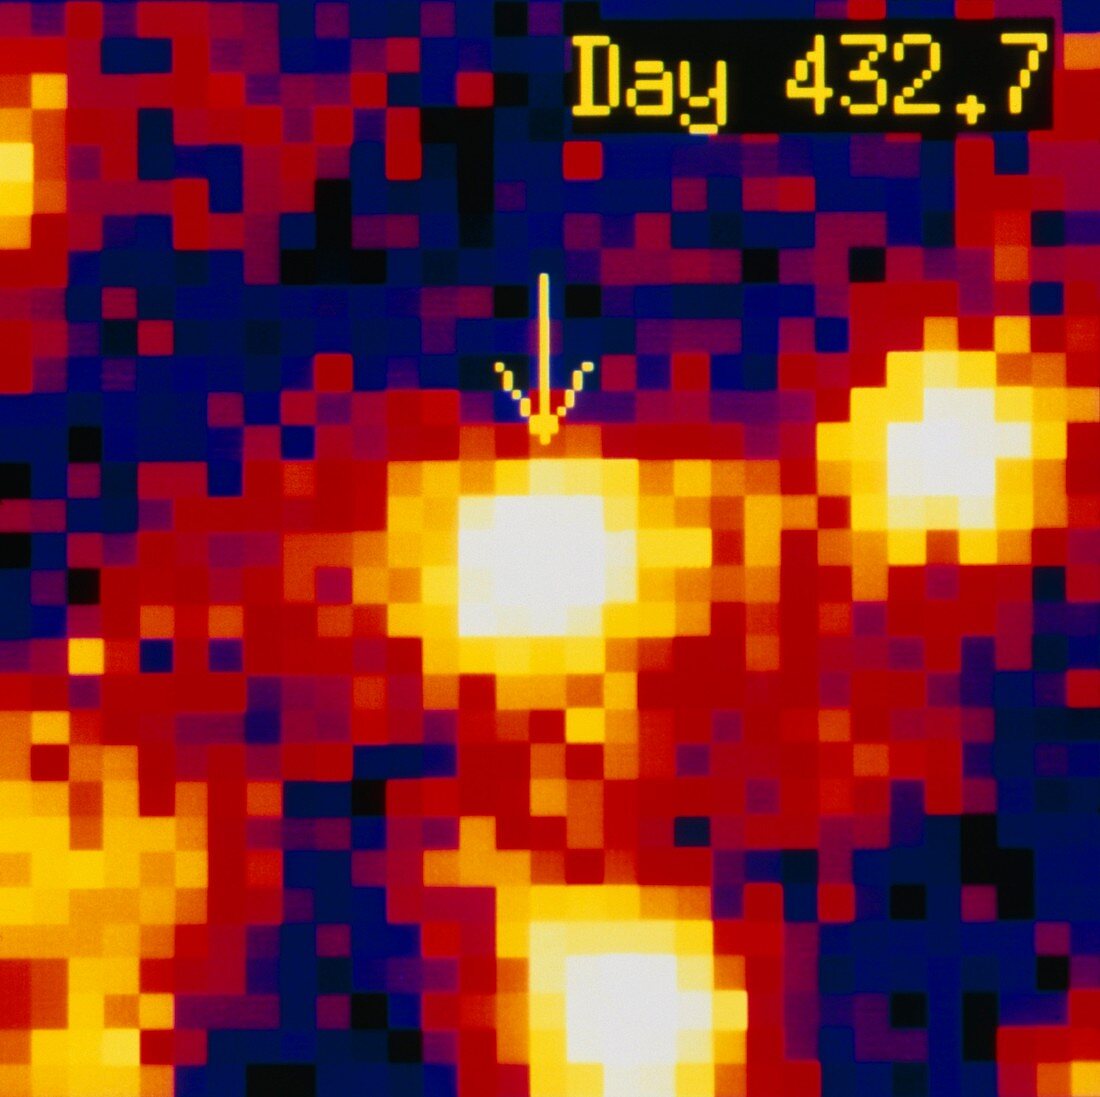 Microlensing by brown dwarf star,second frame